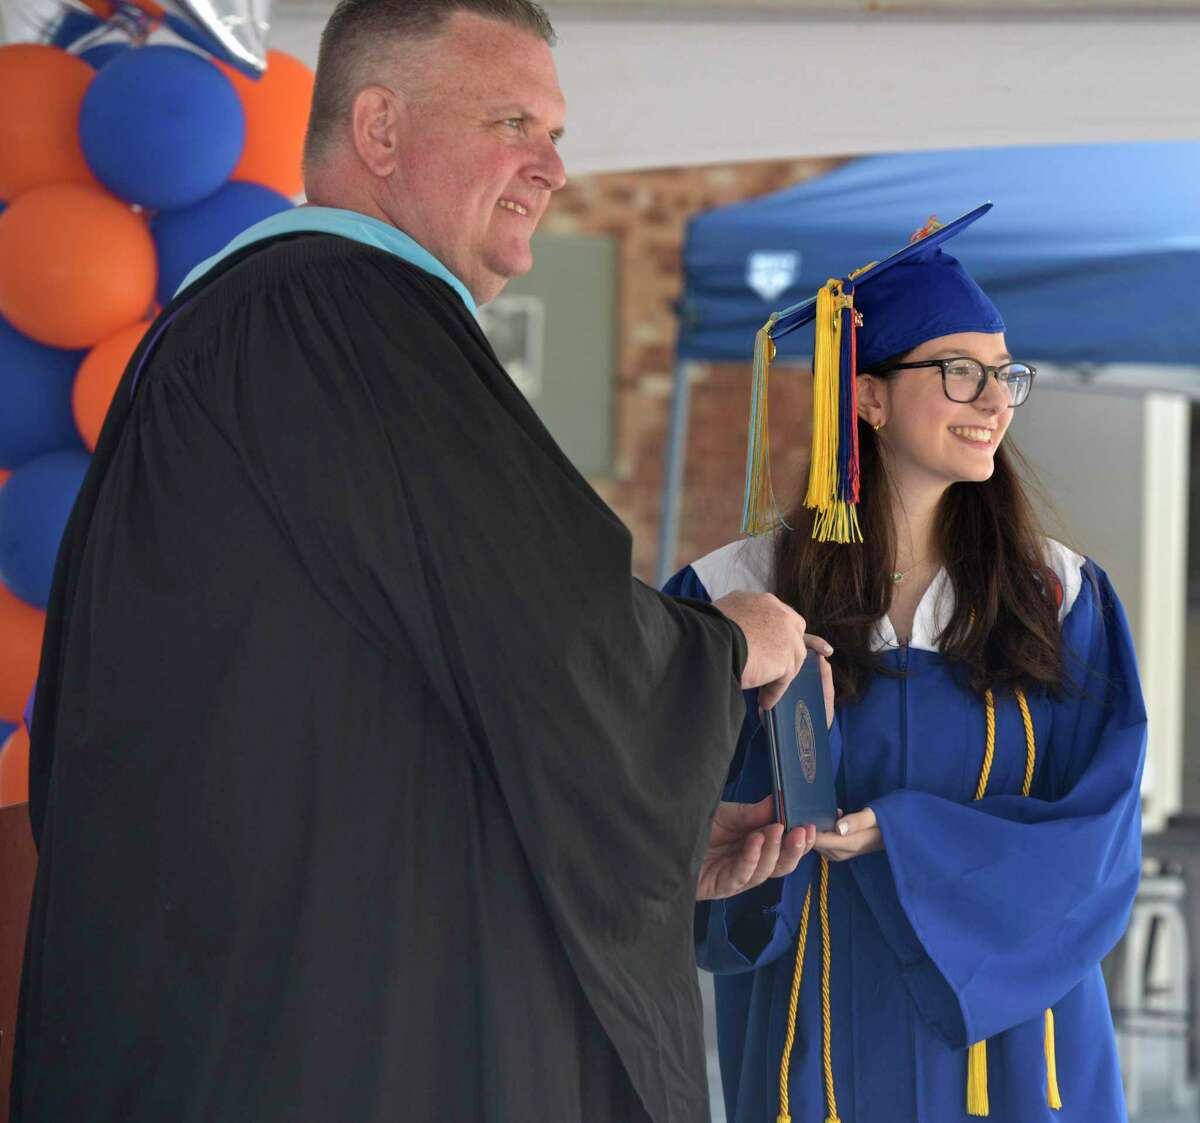 Principal Daniel Donovan posses for a photograph with graduate Rebecca Leigh Andersen during the 2020 Danbury High School graduation, Wednesday, June 10, 2020, at Danbury High School, Danbury, Conn. Graduation is taking place over three days, June 10, 11, and 12.